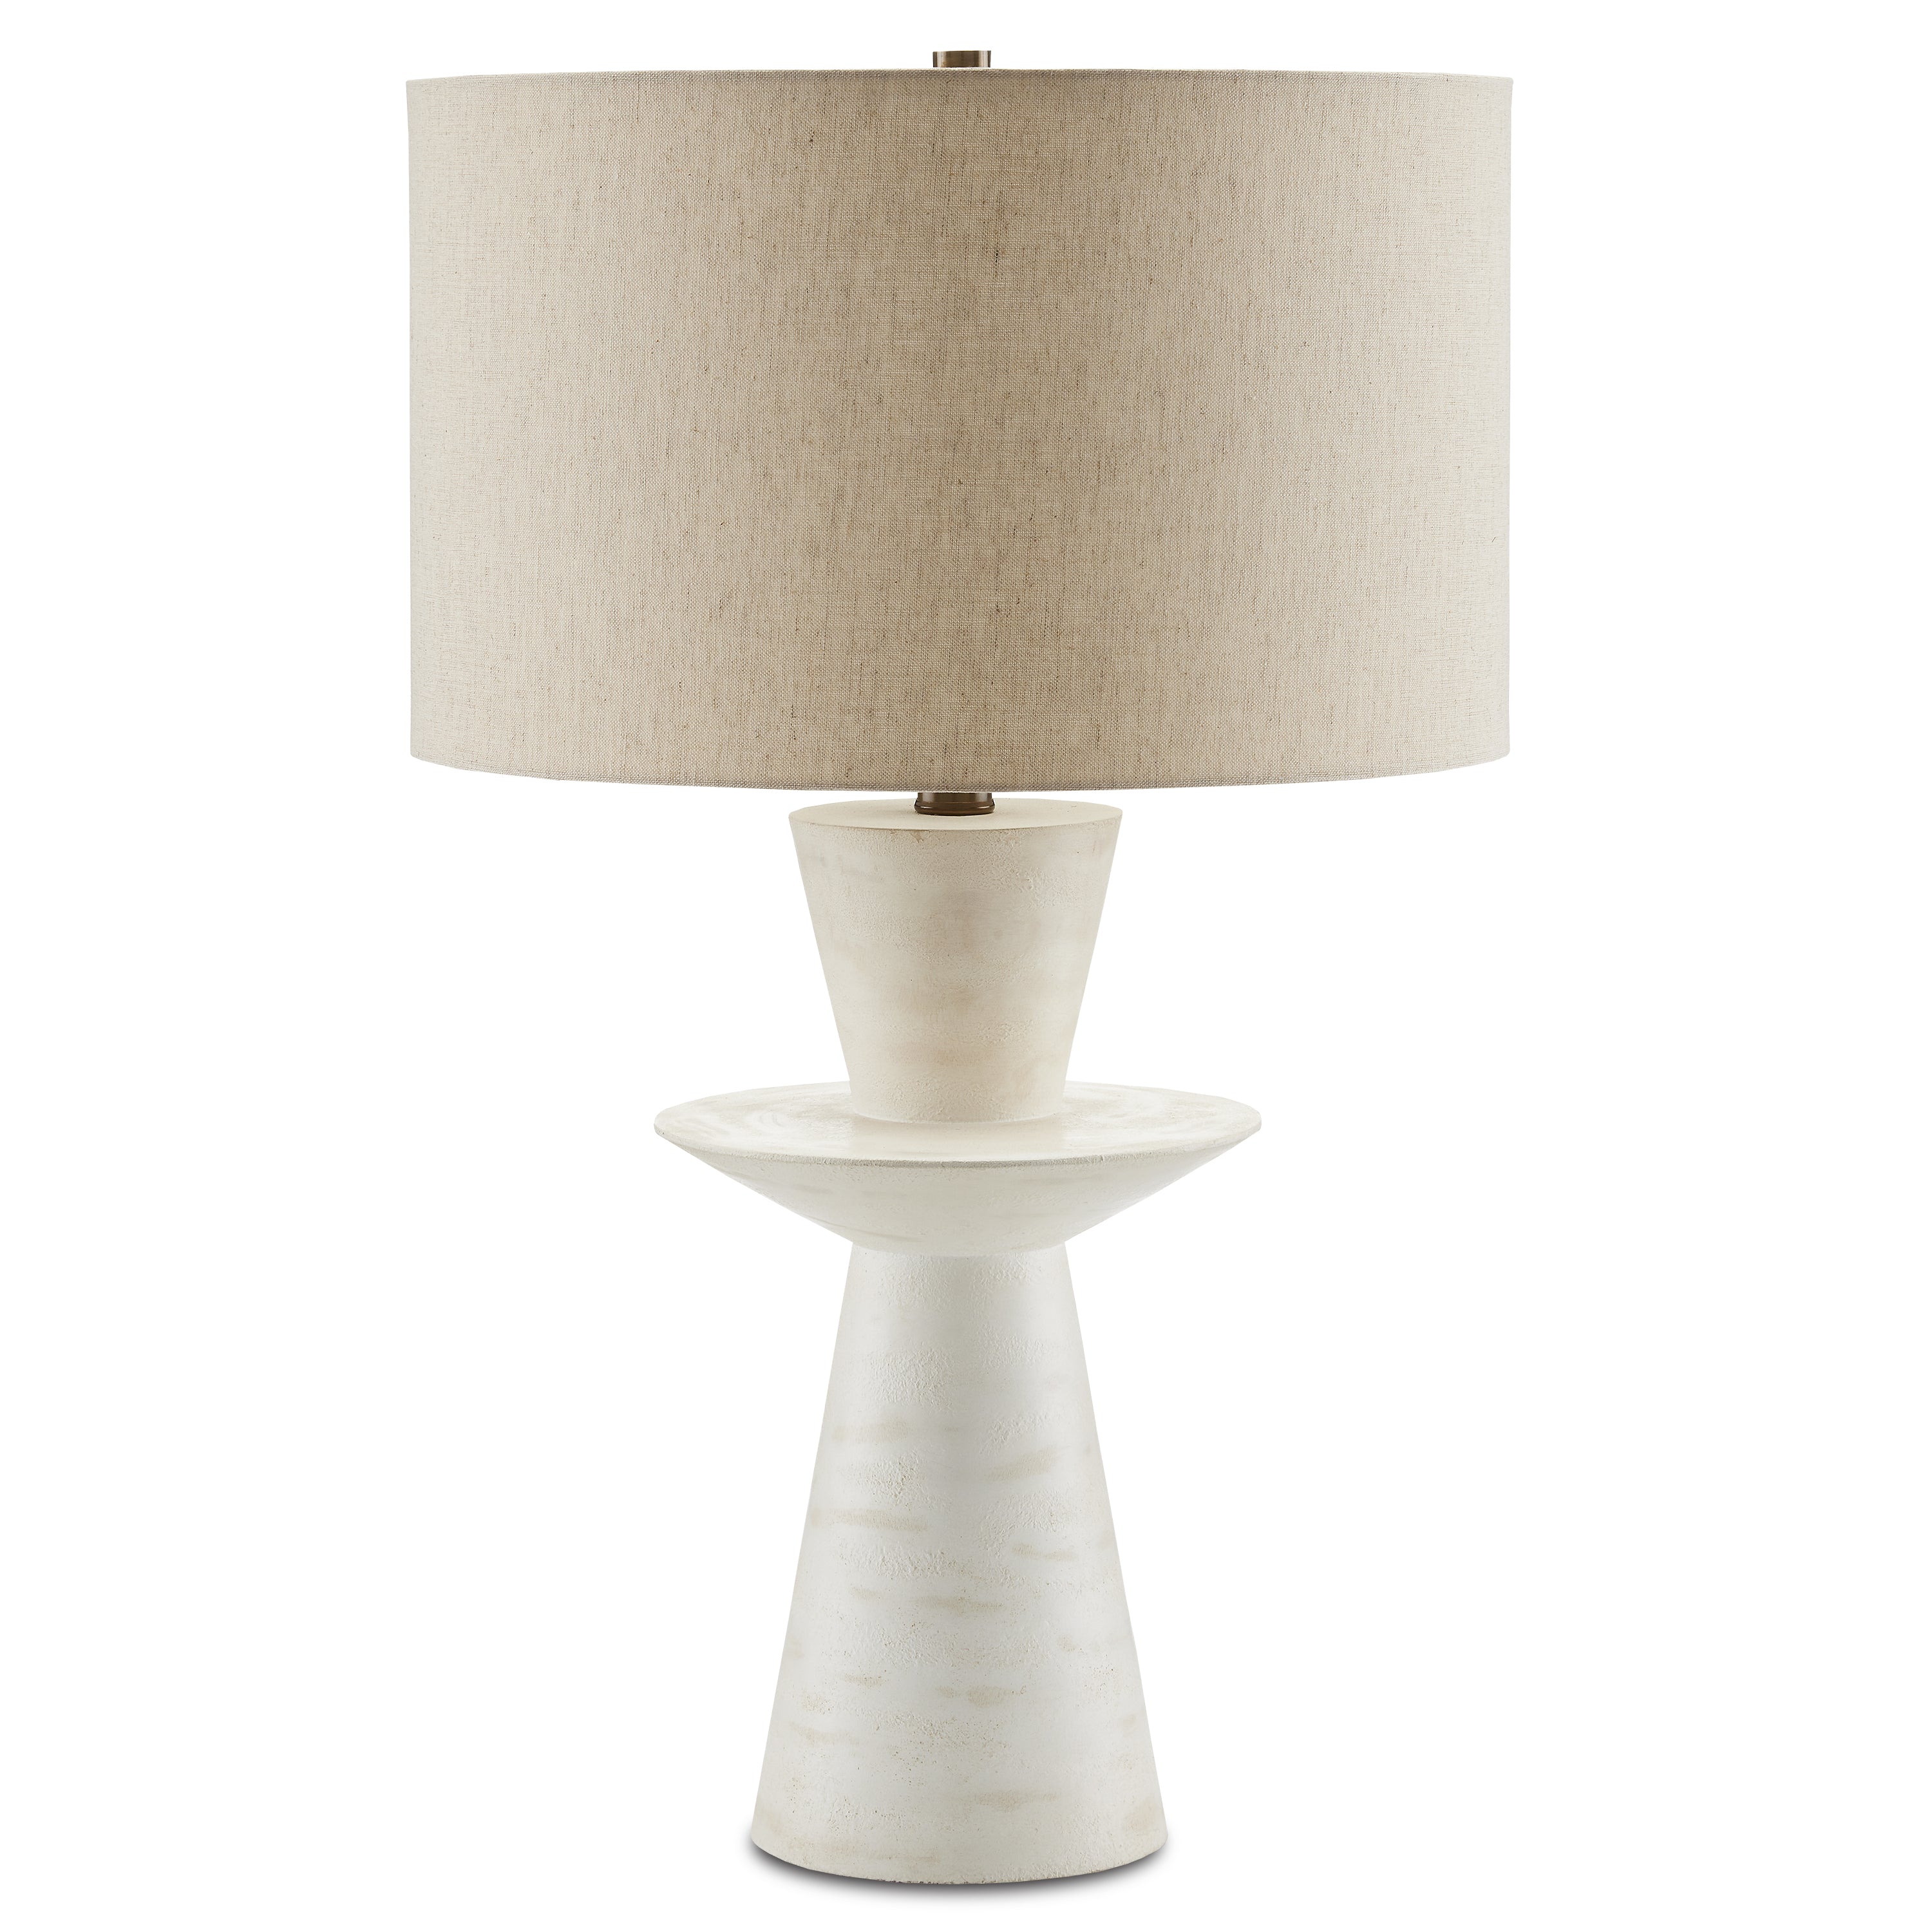 Image of Cantata White Table Lamp